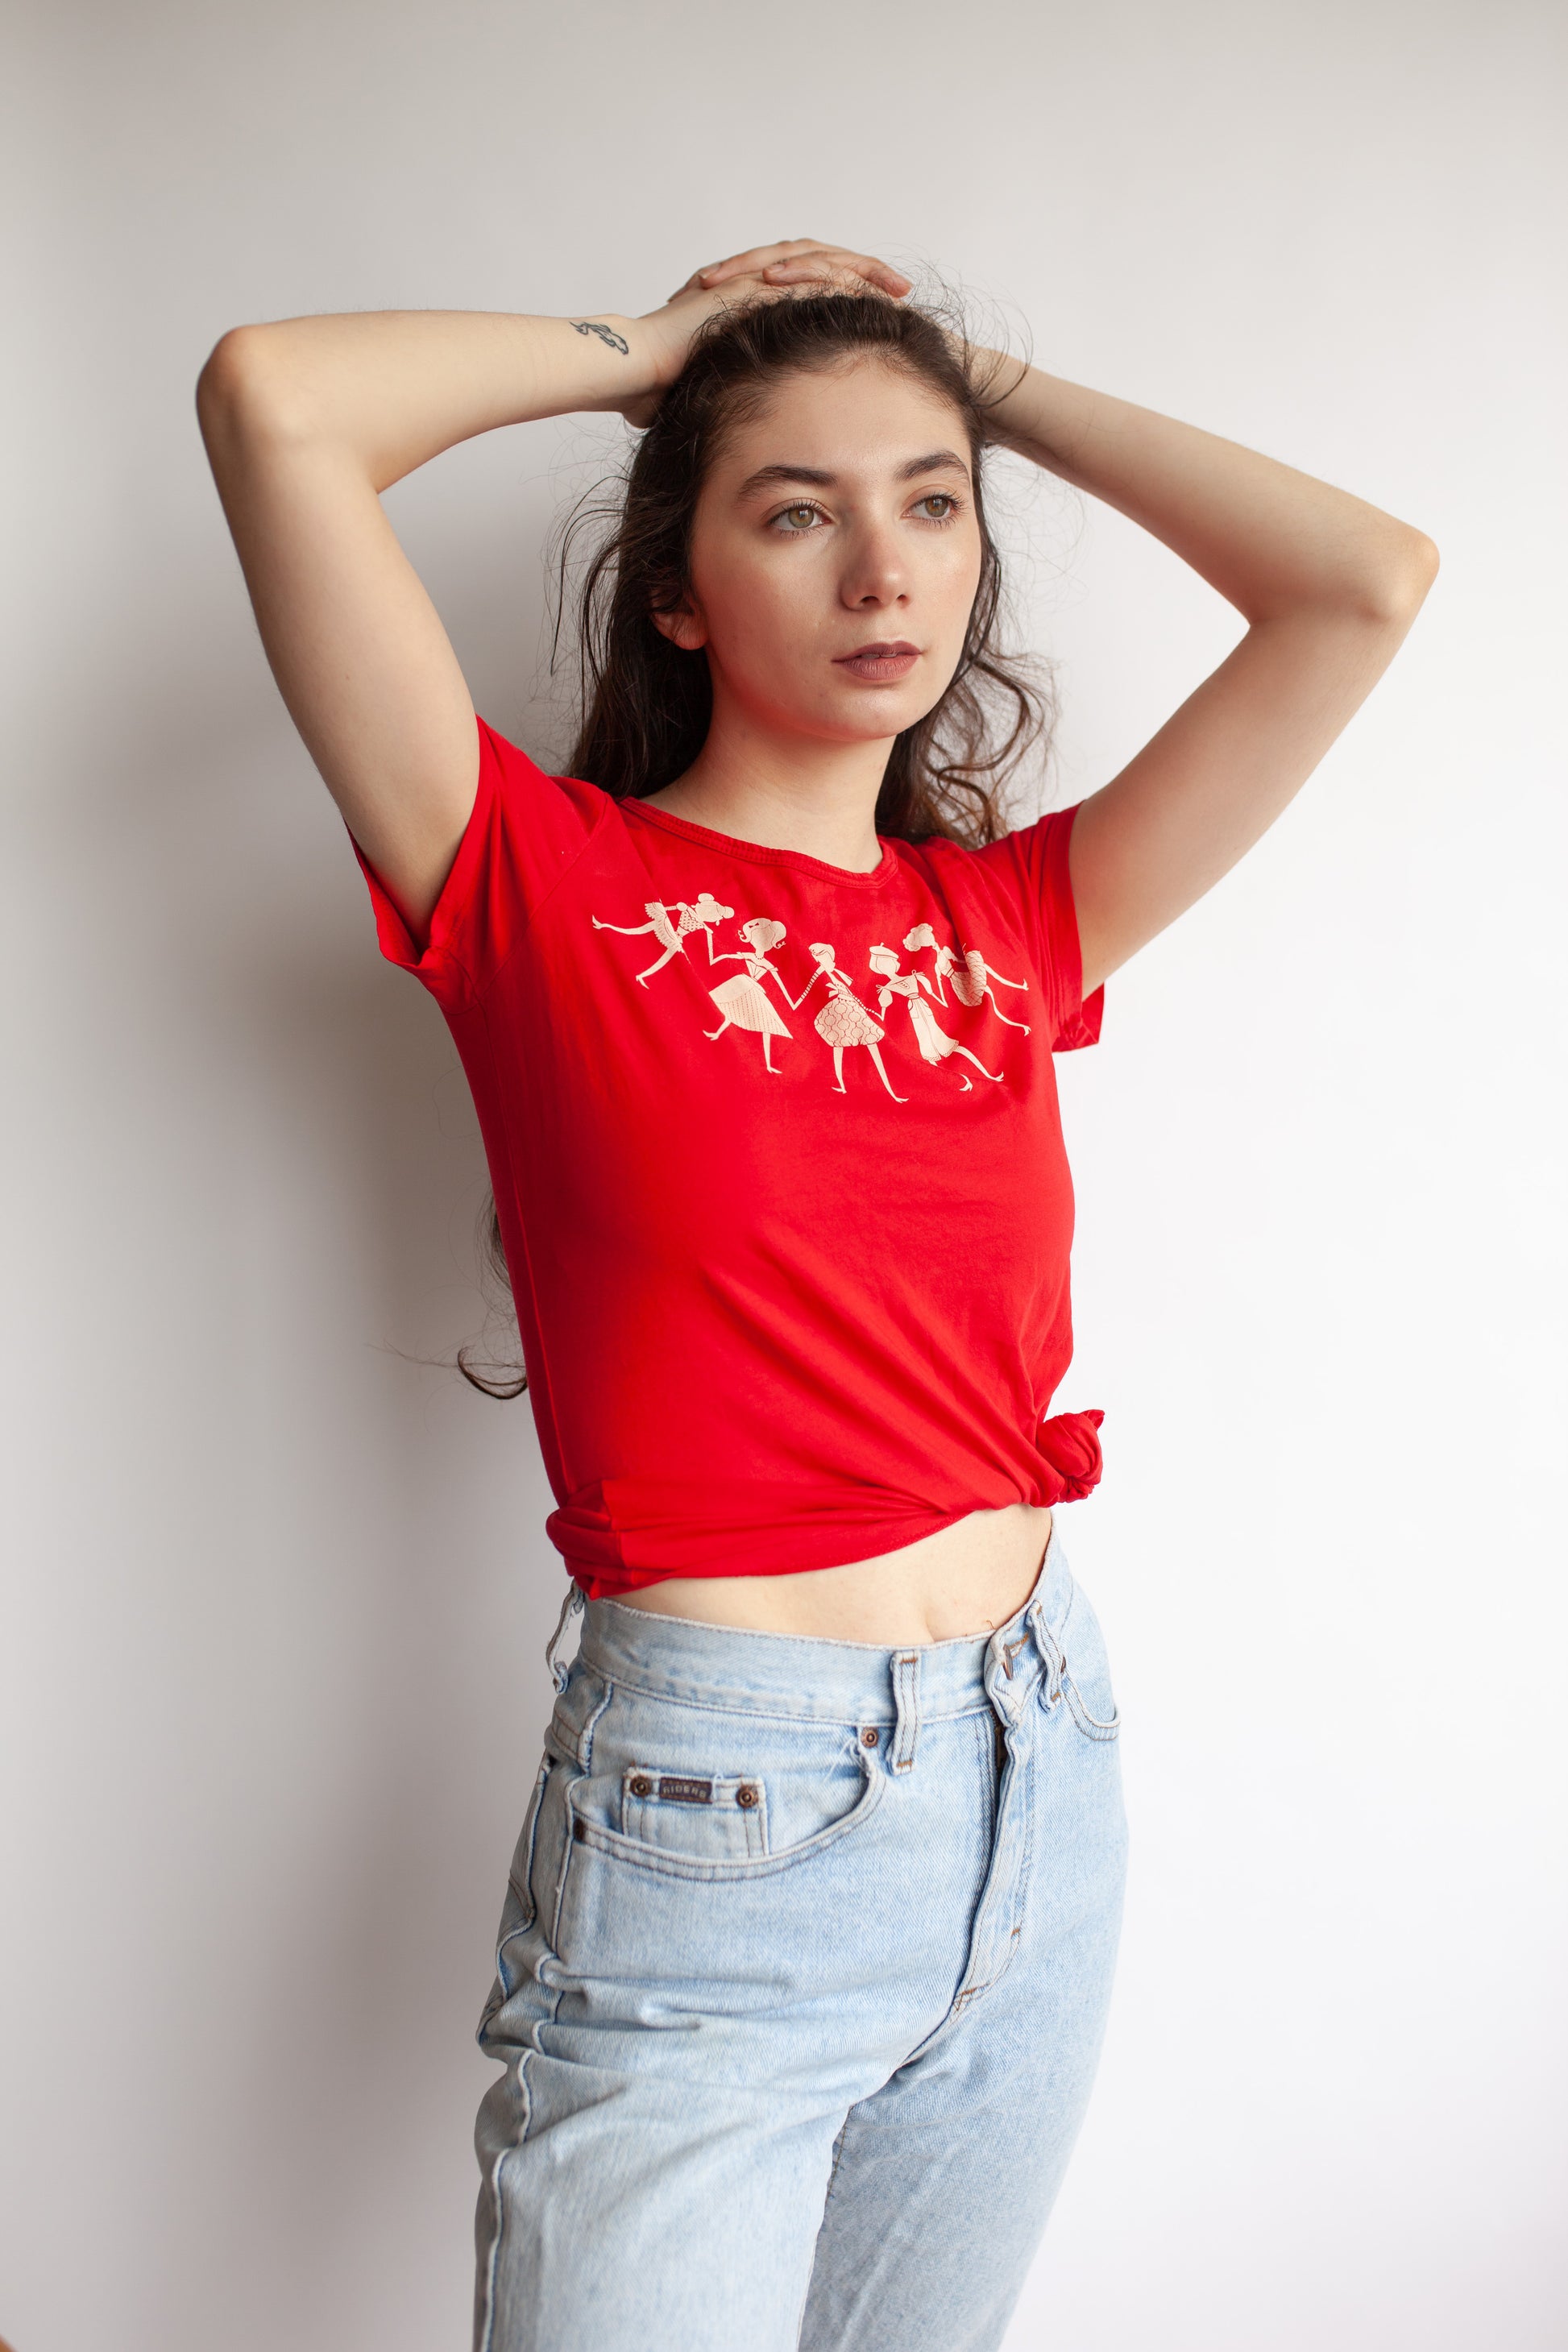 Brunette model wearing red tee with women holding hands